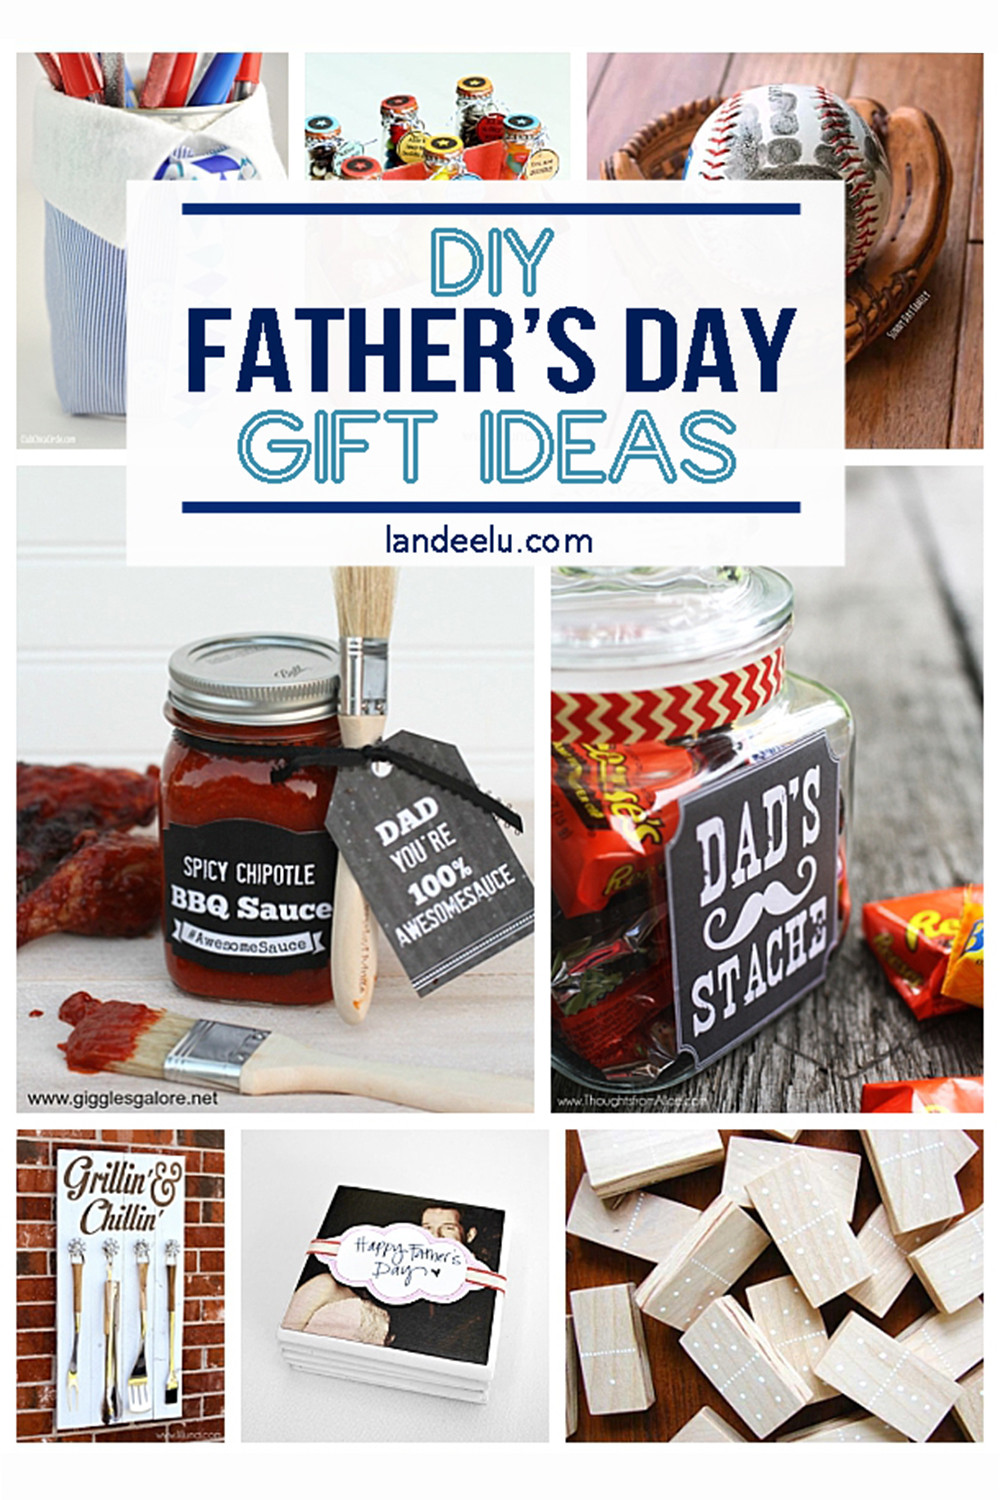 DIY Fathers Gifts
 21 DIY Father s Day Gifts to Celebrate Dad landeelu